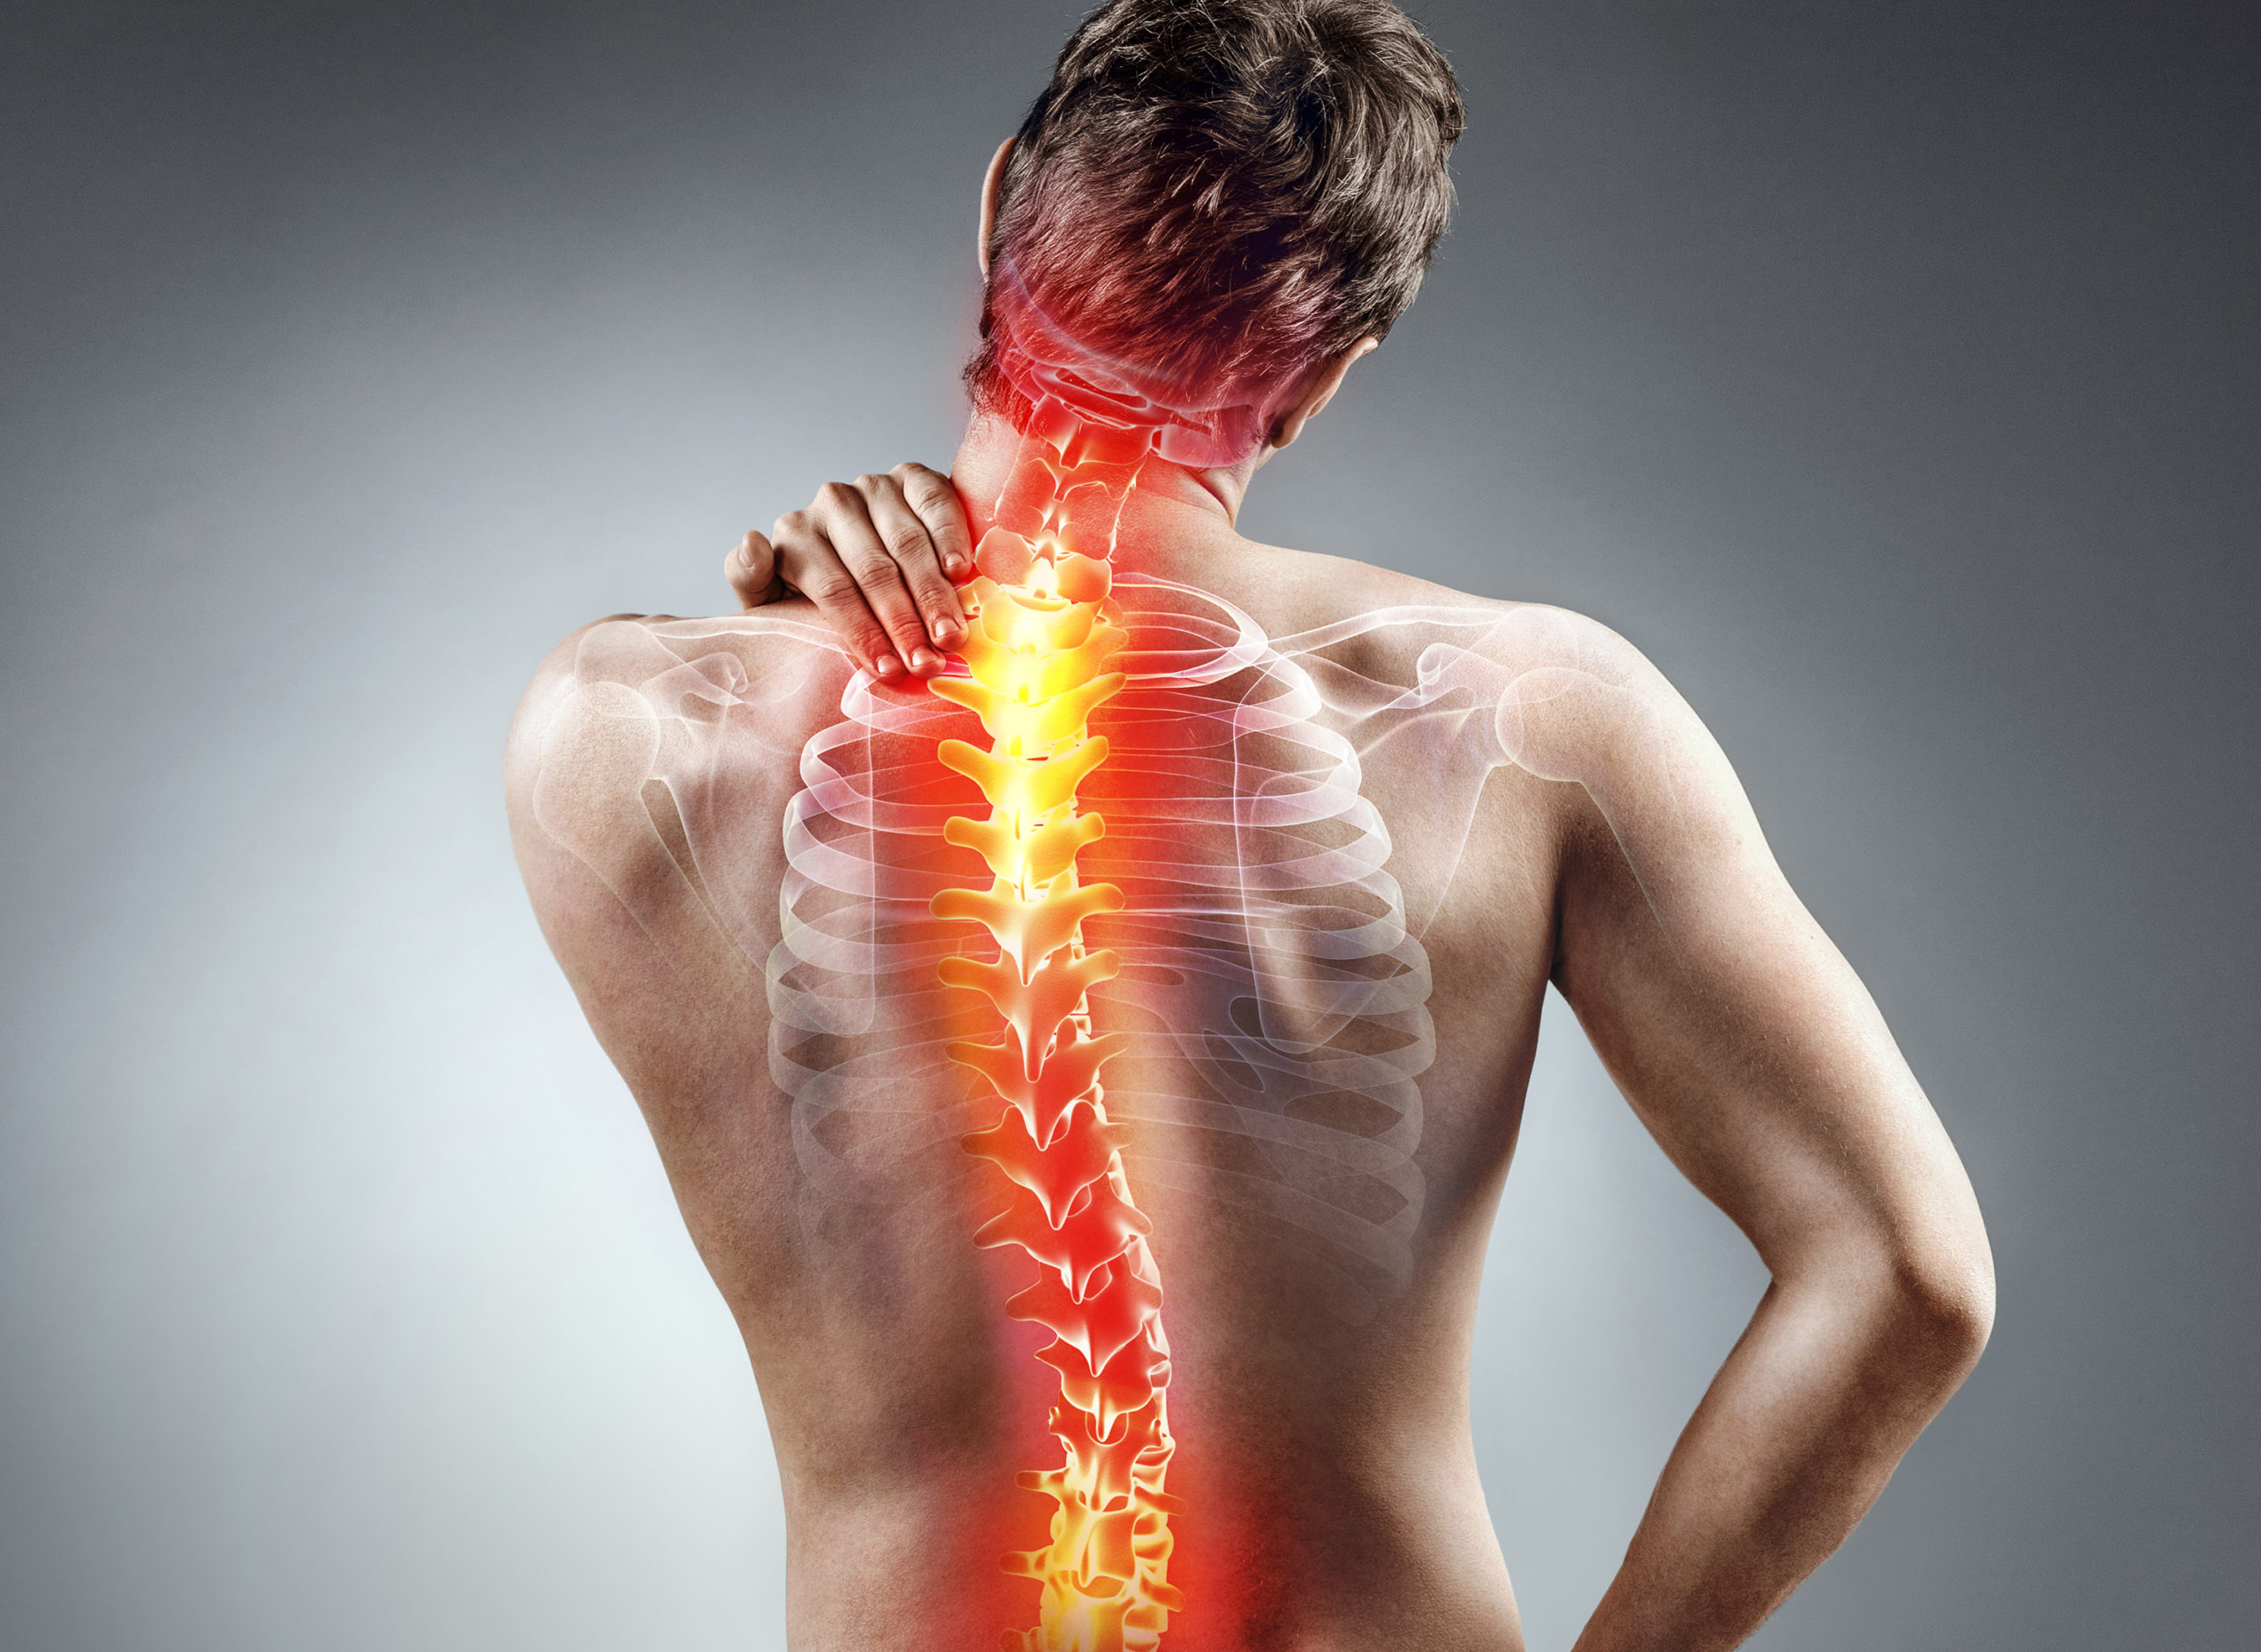 Upper Back Pain: Red Flags to Look Out For